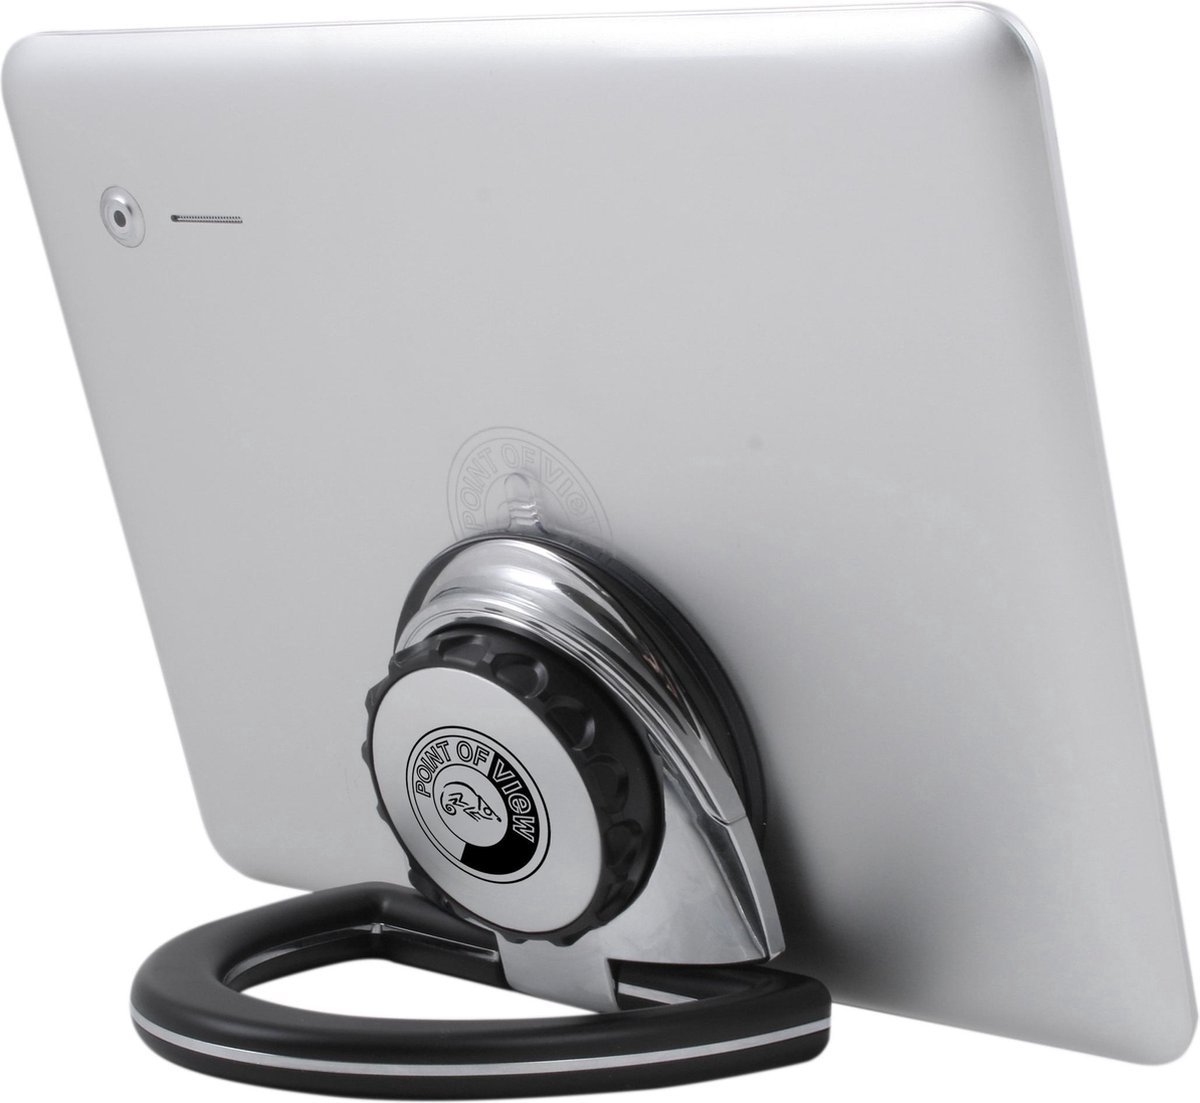 Tablet houder - tablet stand - Point of View ACC-01 - Tablethouder - Zuignap - tablet accessoires